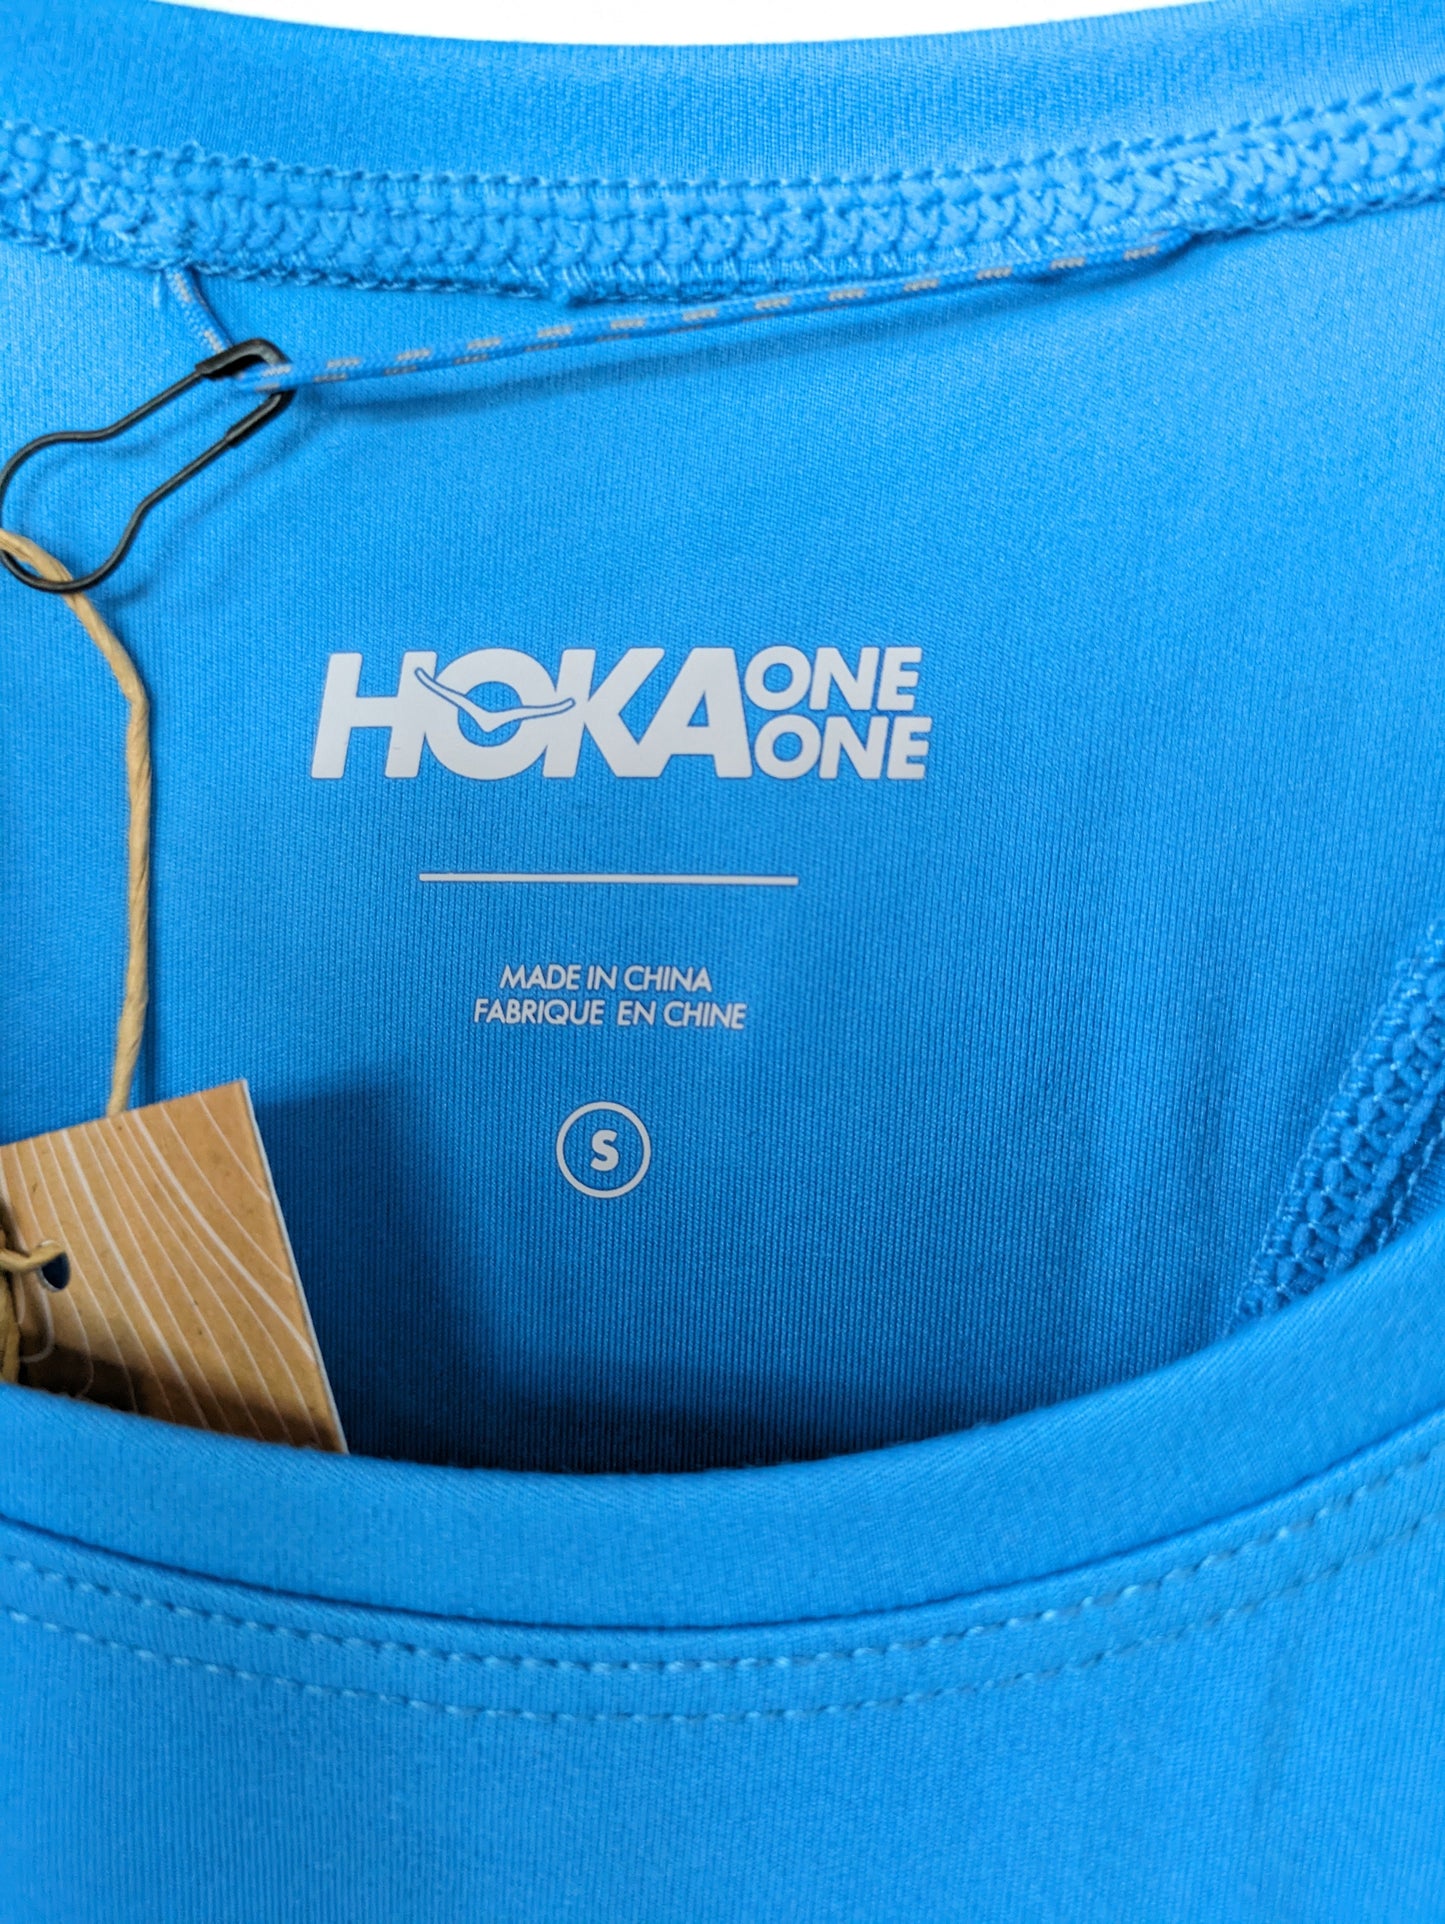 Athletic Tank Top By Hoka  Size: S